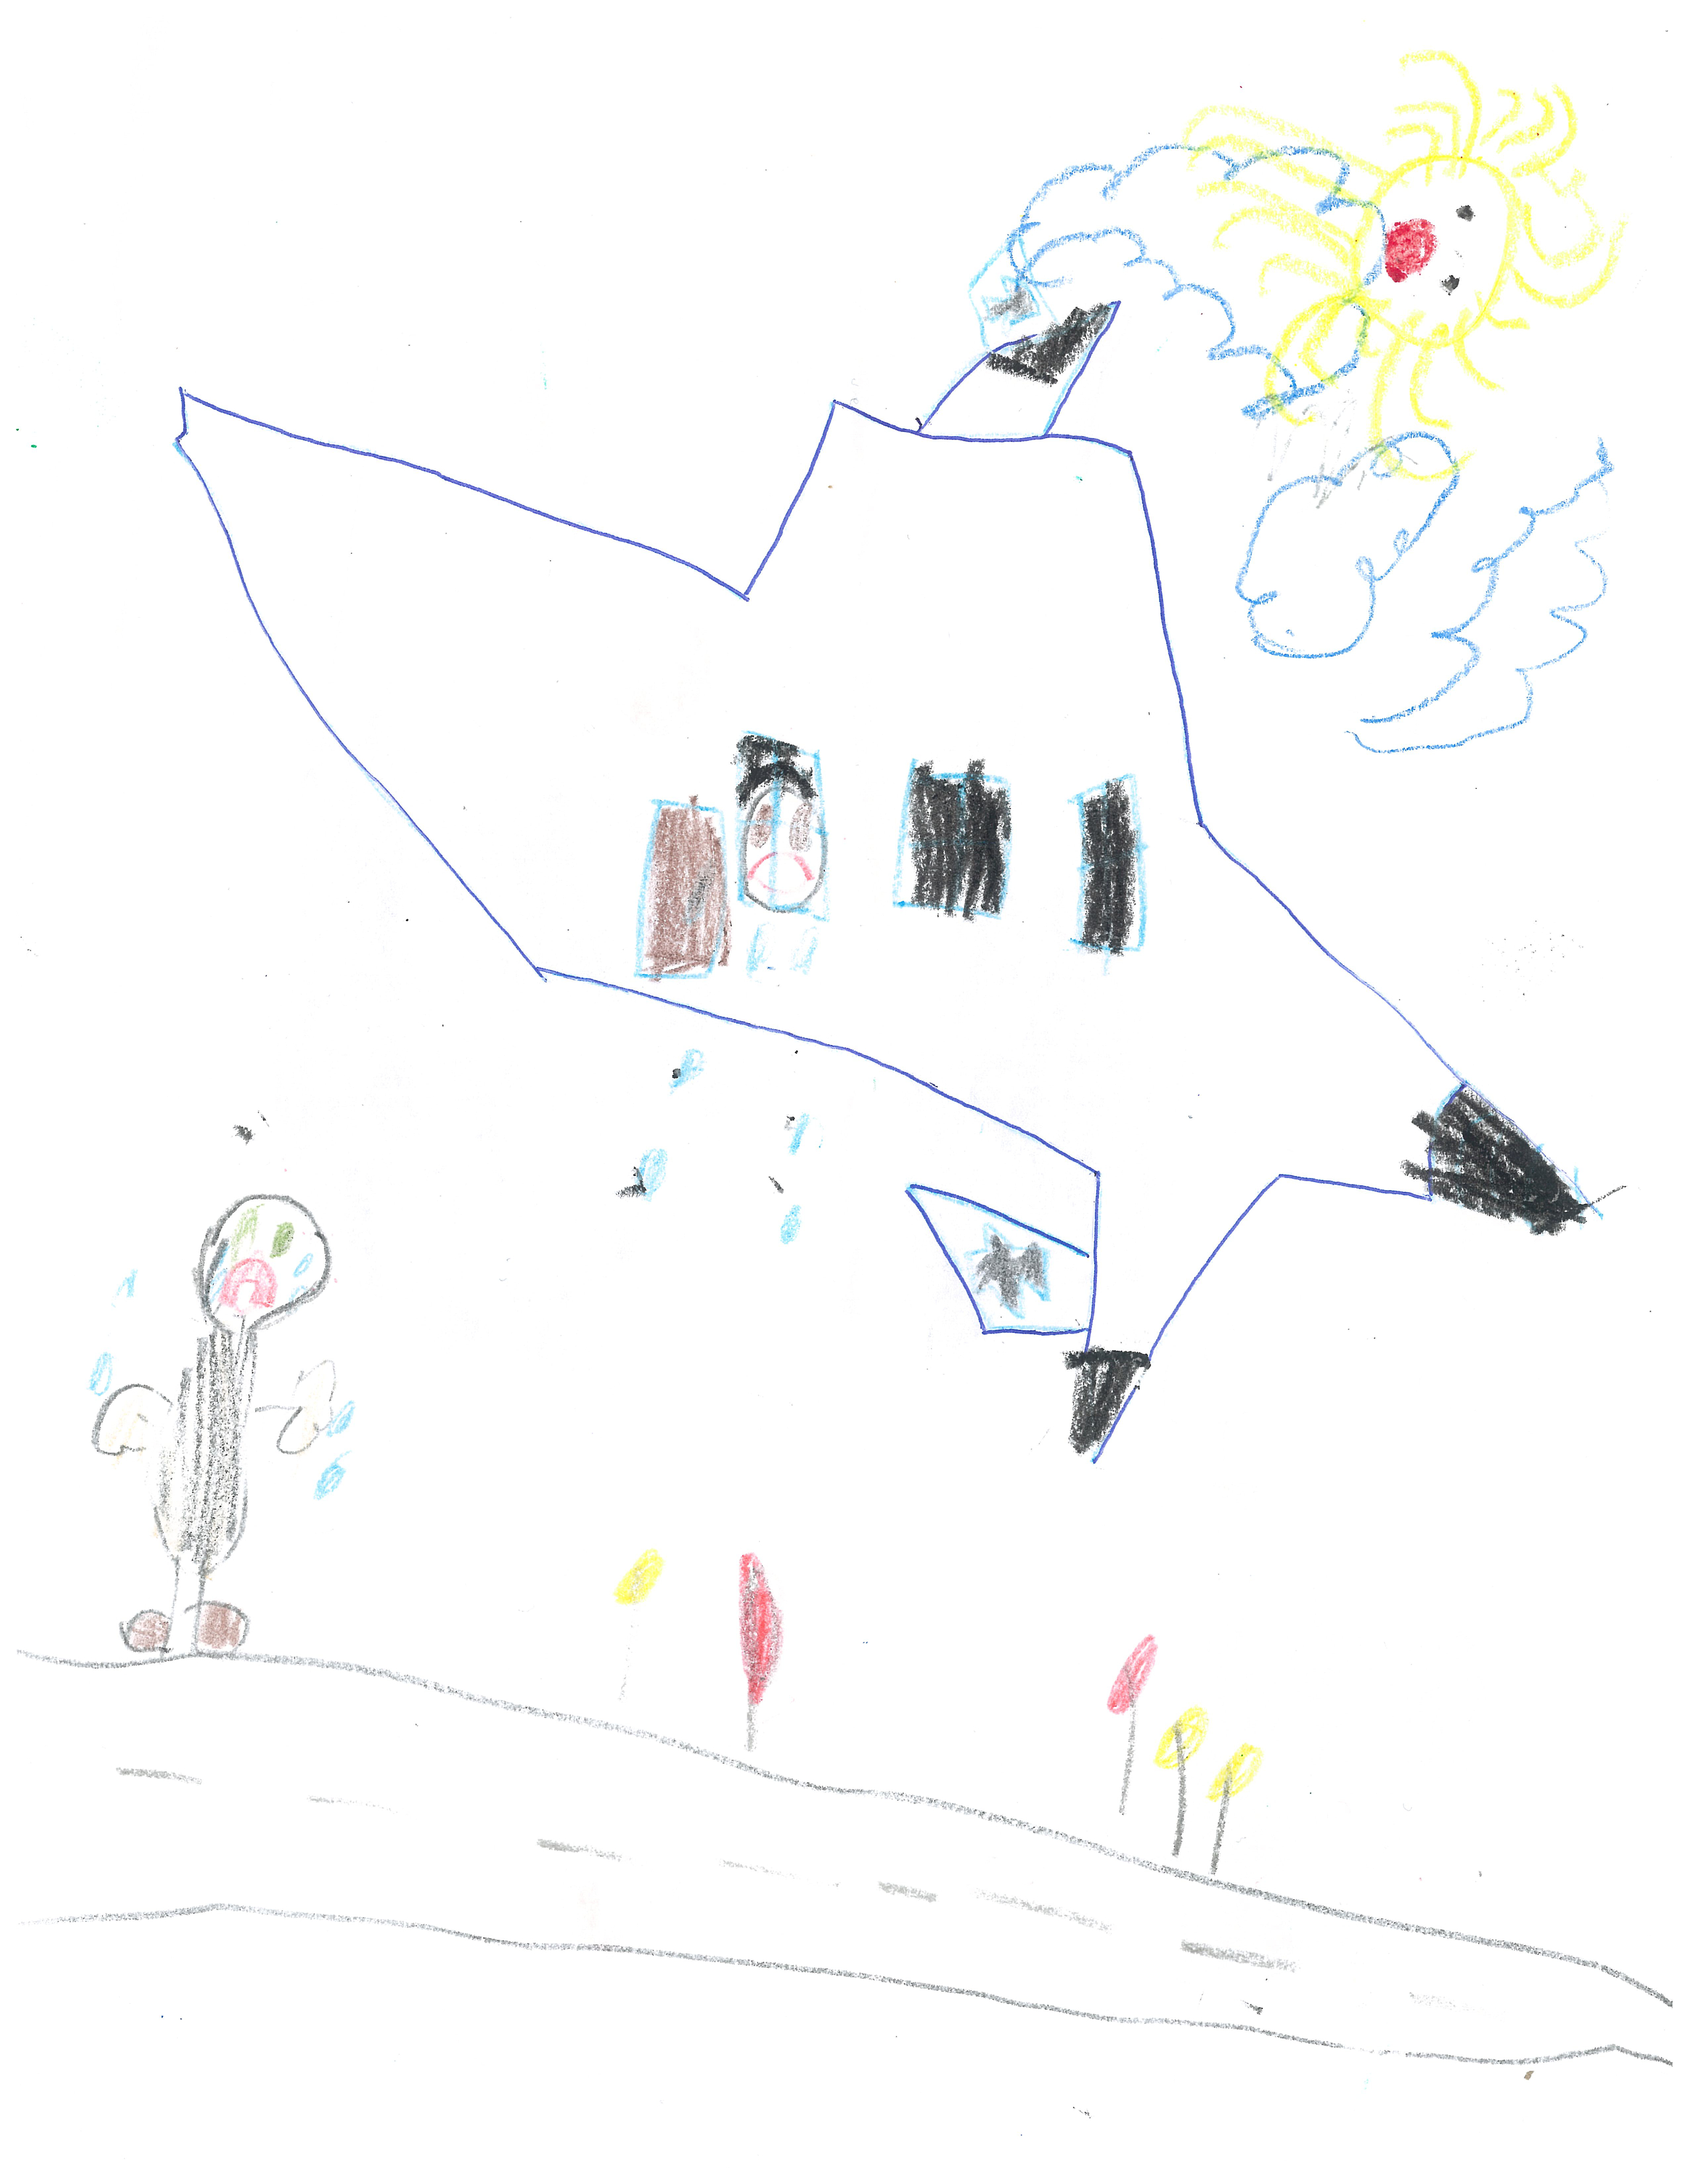 Picture drawn by a detained child, weeping as parent is deported.